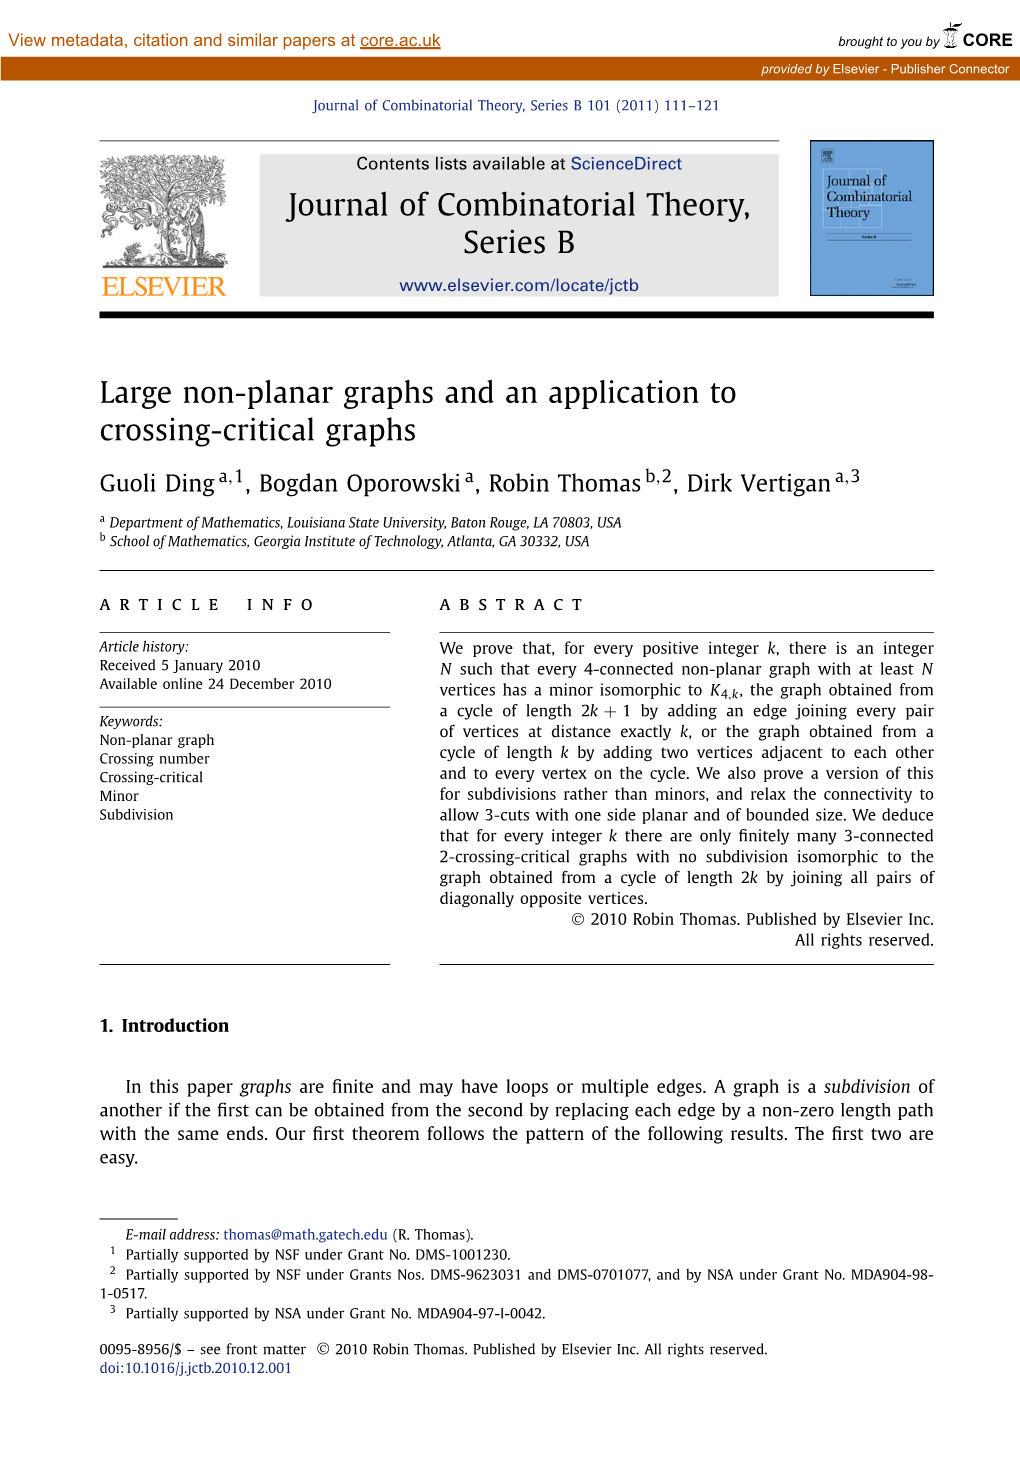 Large Non-Planar Graphs and an Application to Crossing-Critical Graphs